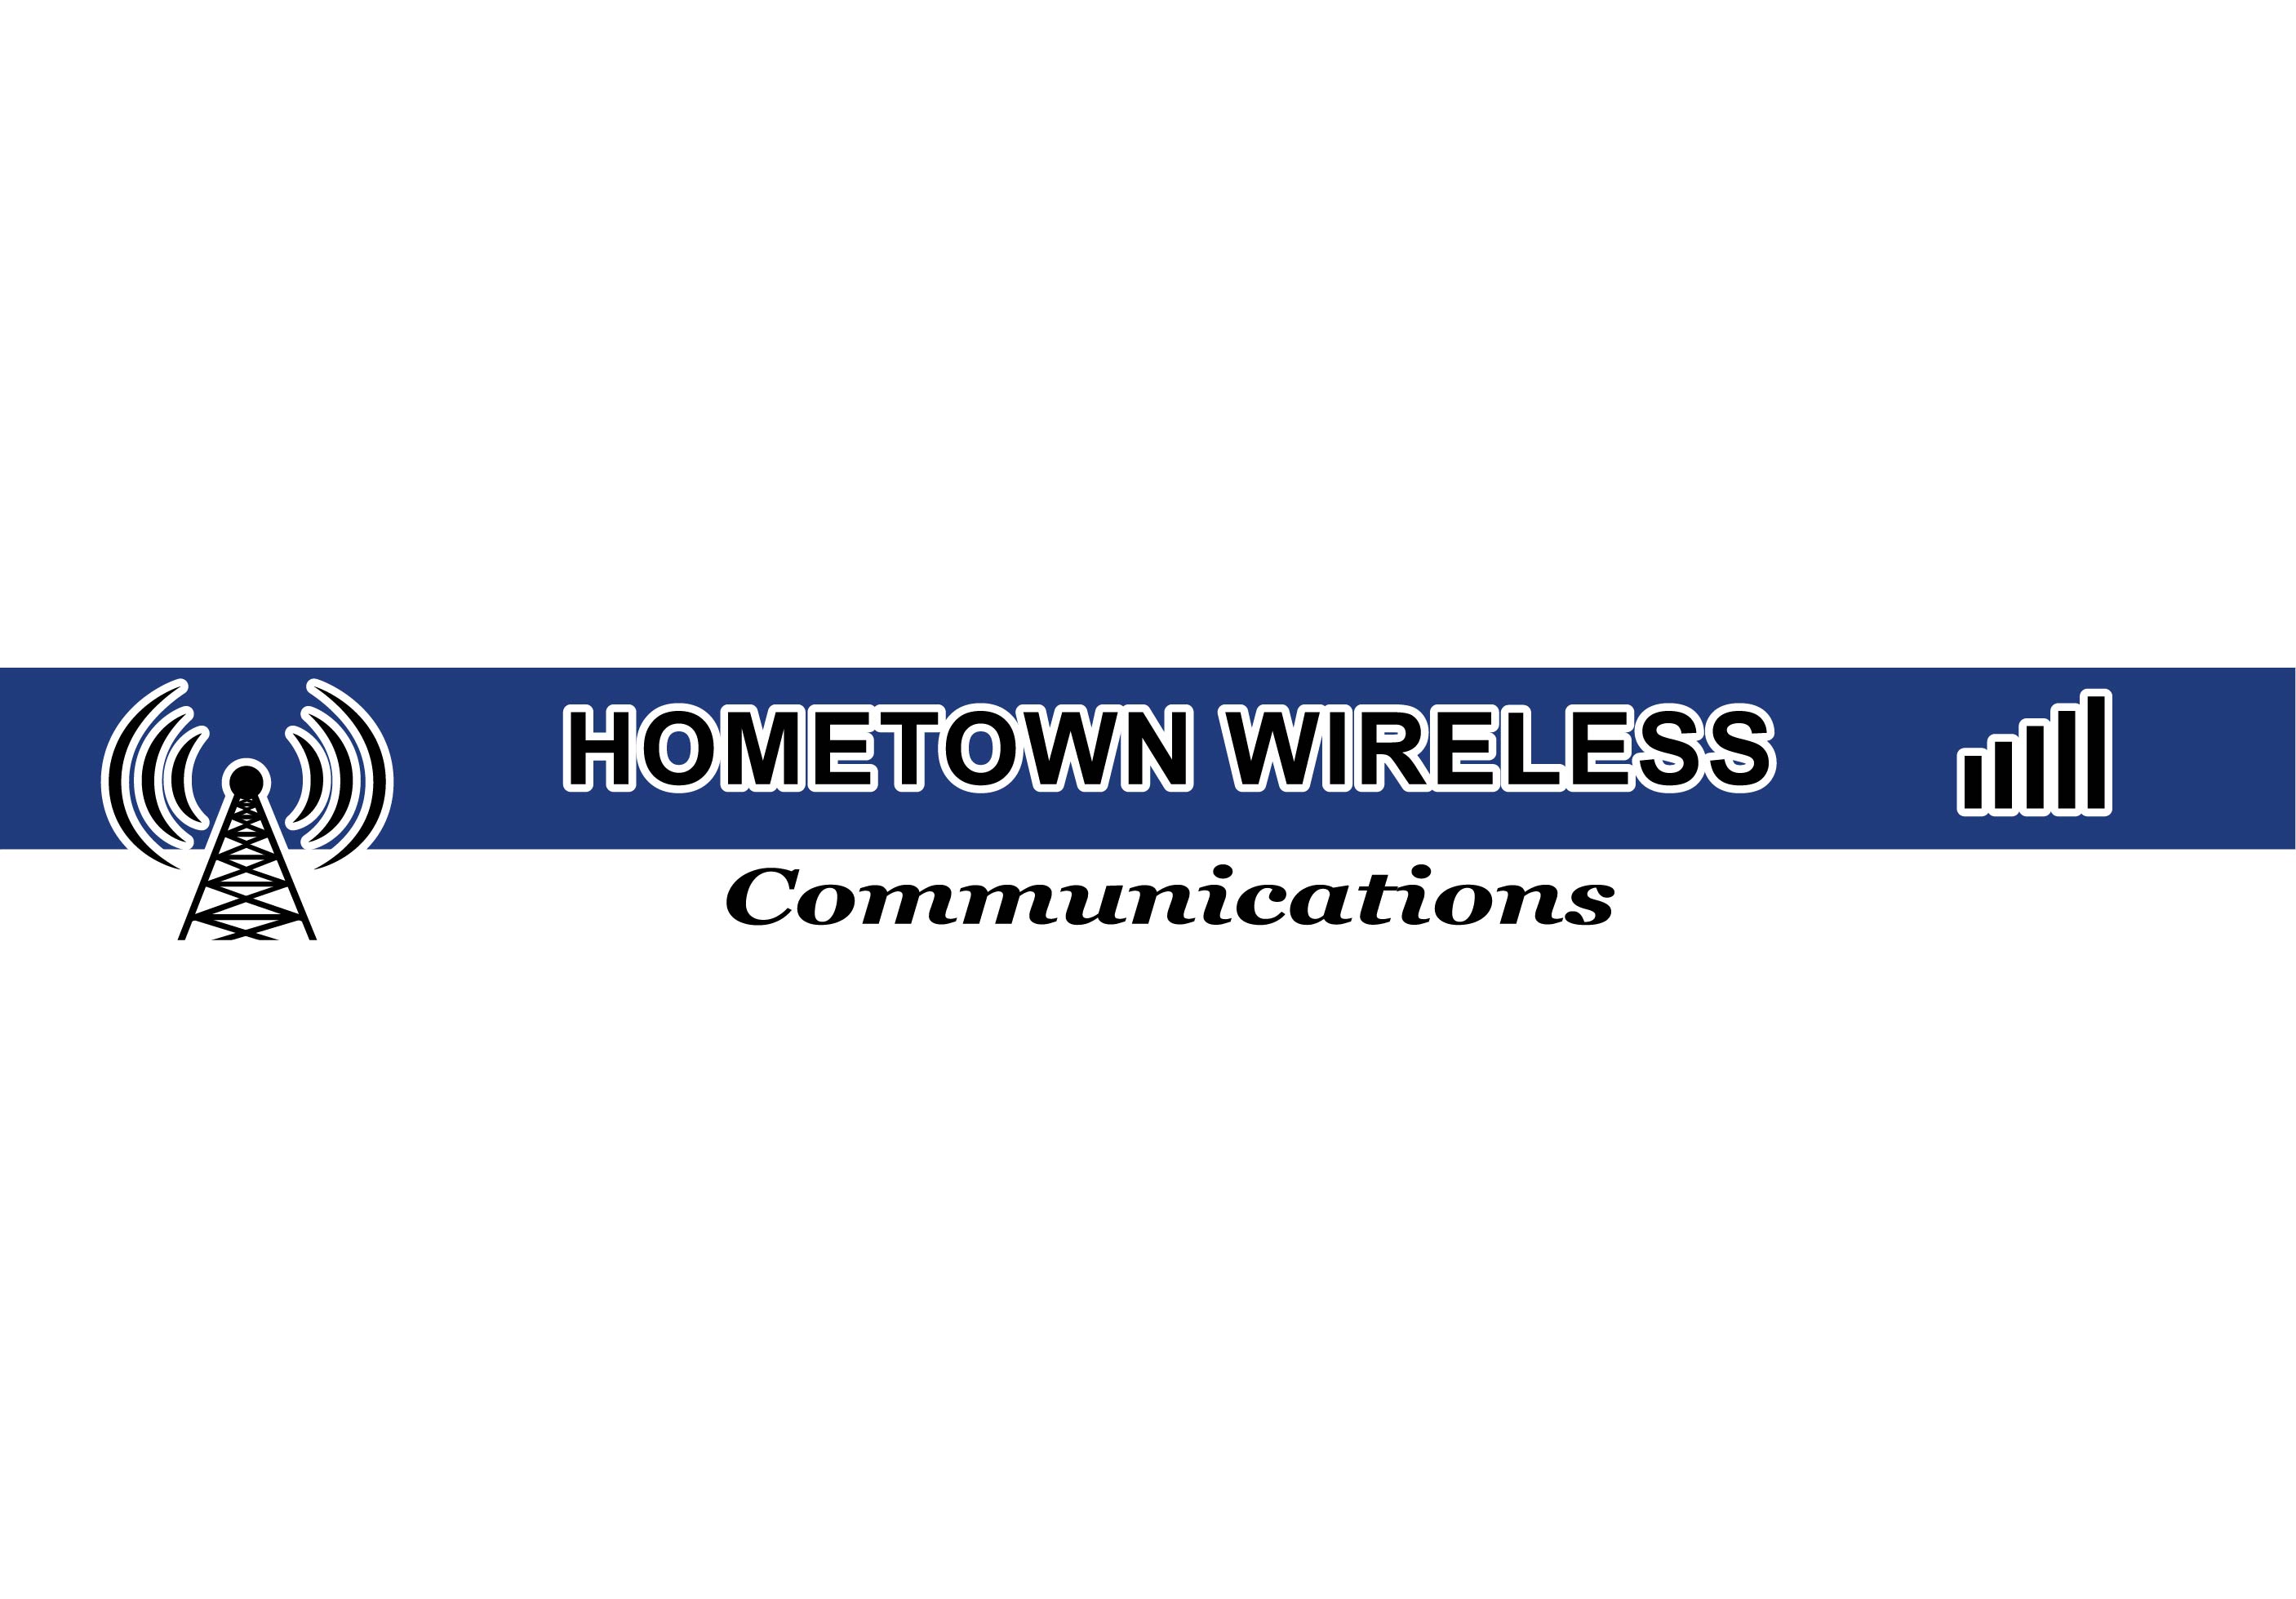 HomeTown Wireless Communication Launches New Services for Zephyrhills Community